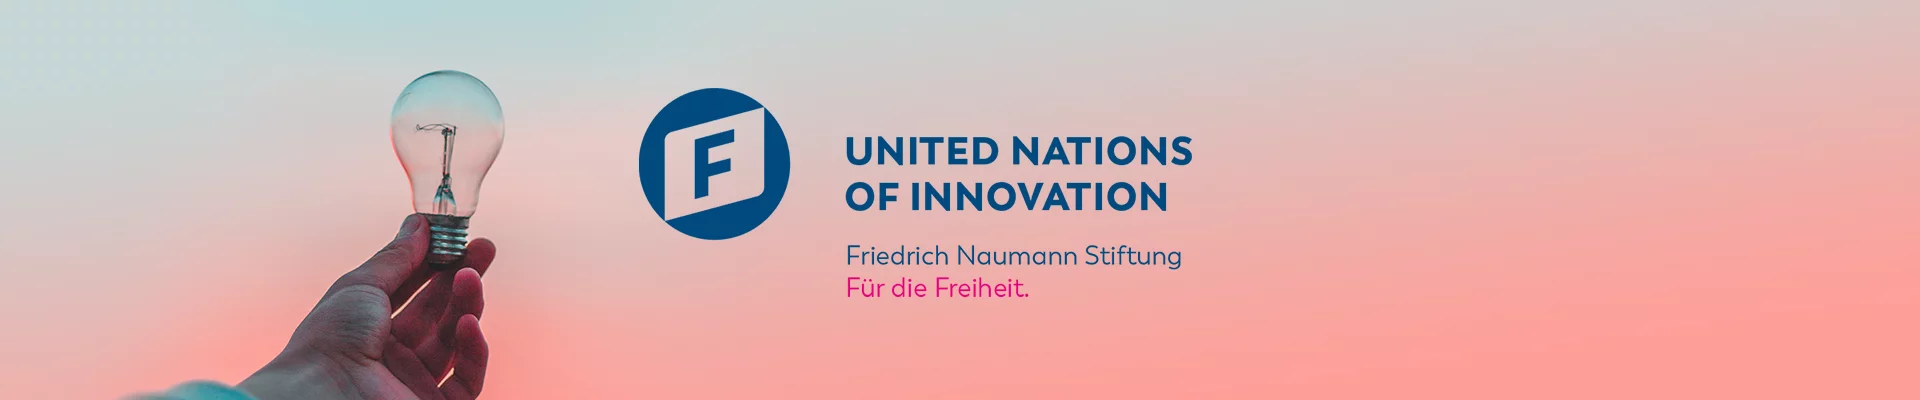 United Nations of Innovation 